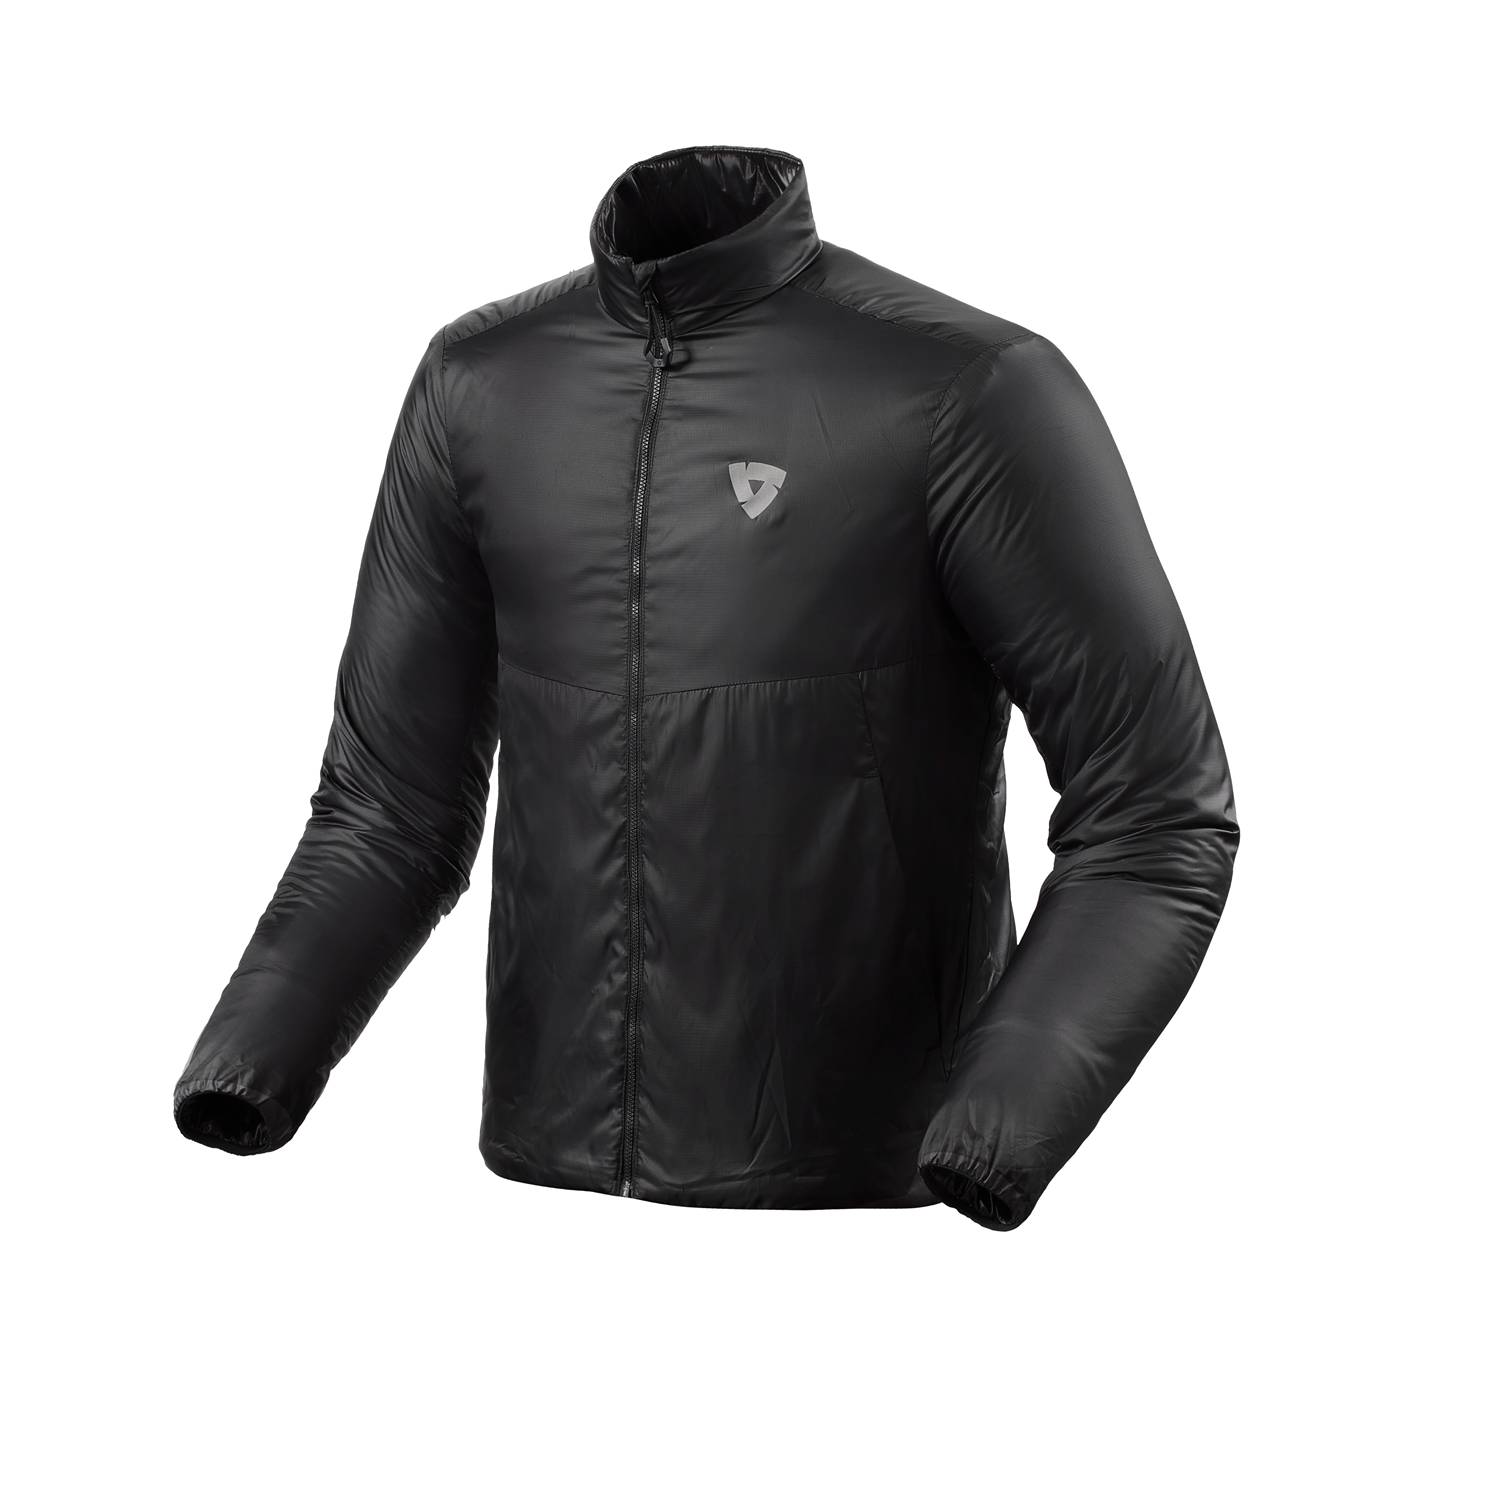 Image of EU REV'IT! Core 2 Mid Layer Jacket Black Taille XL